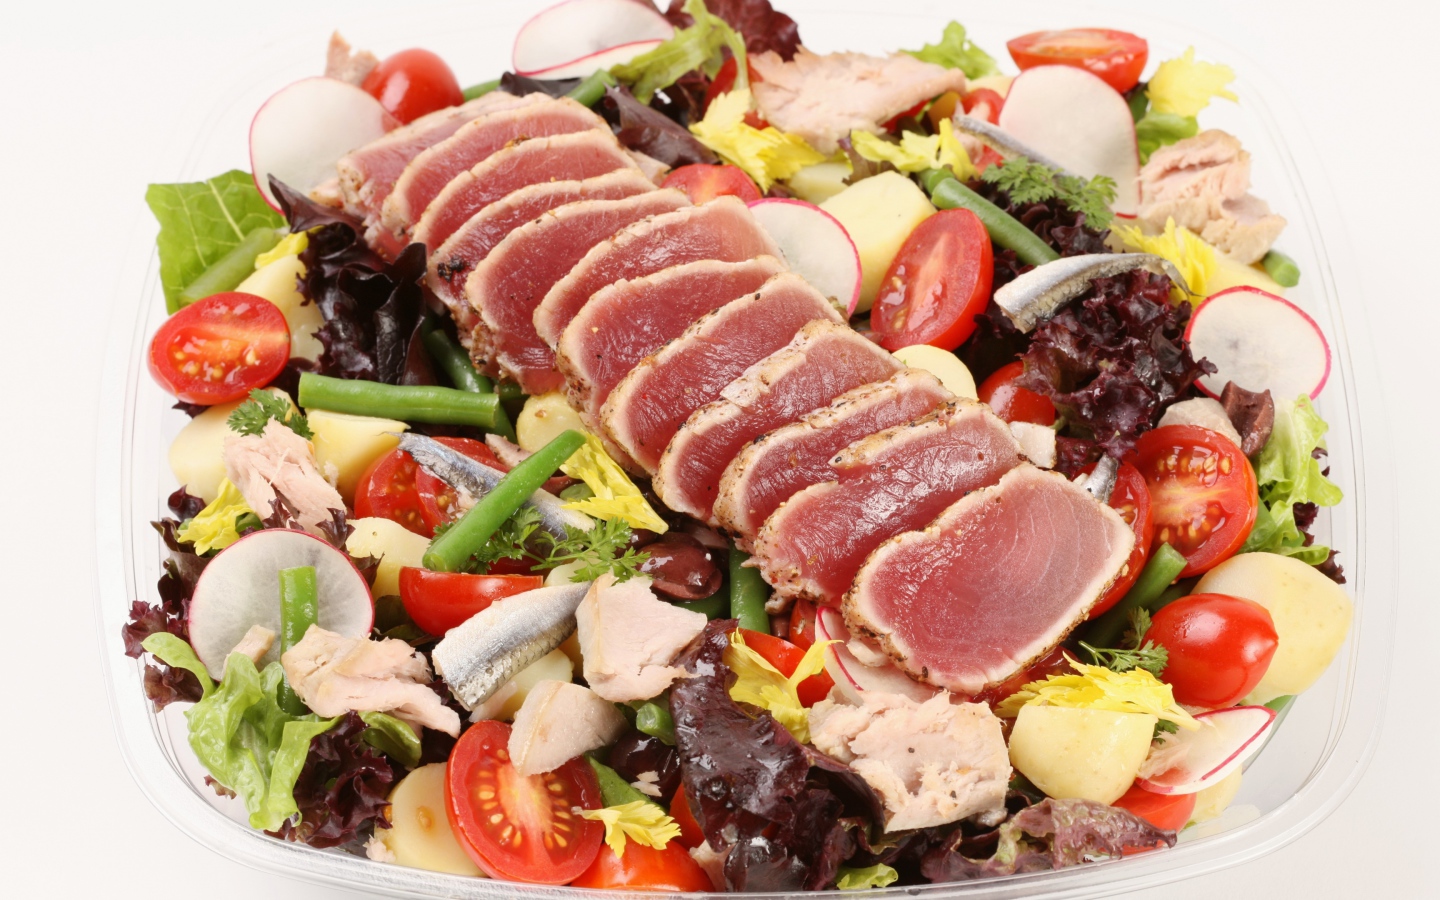 Vegetable salad with fish and meat